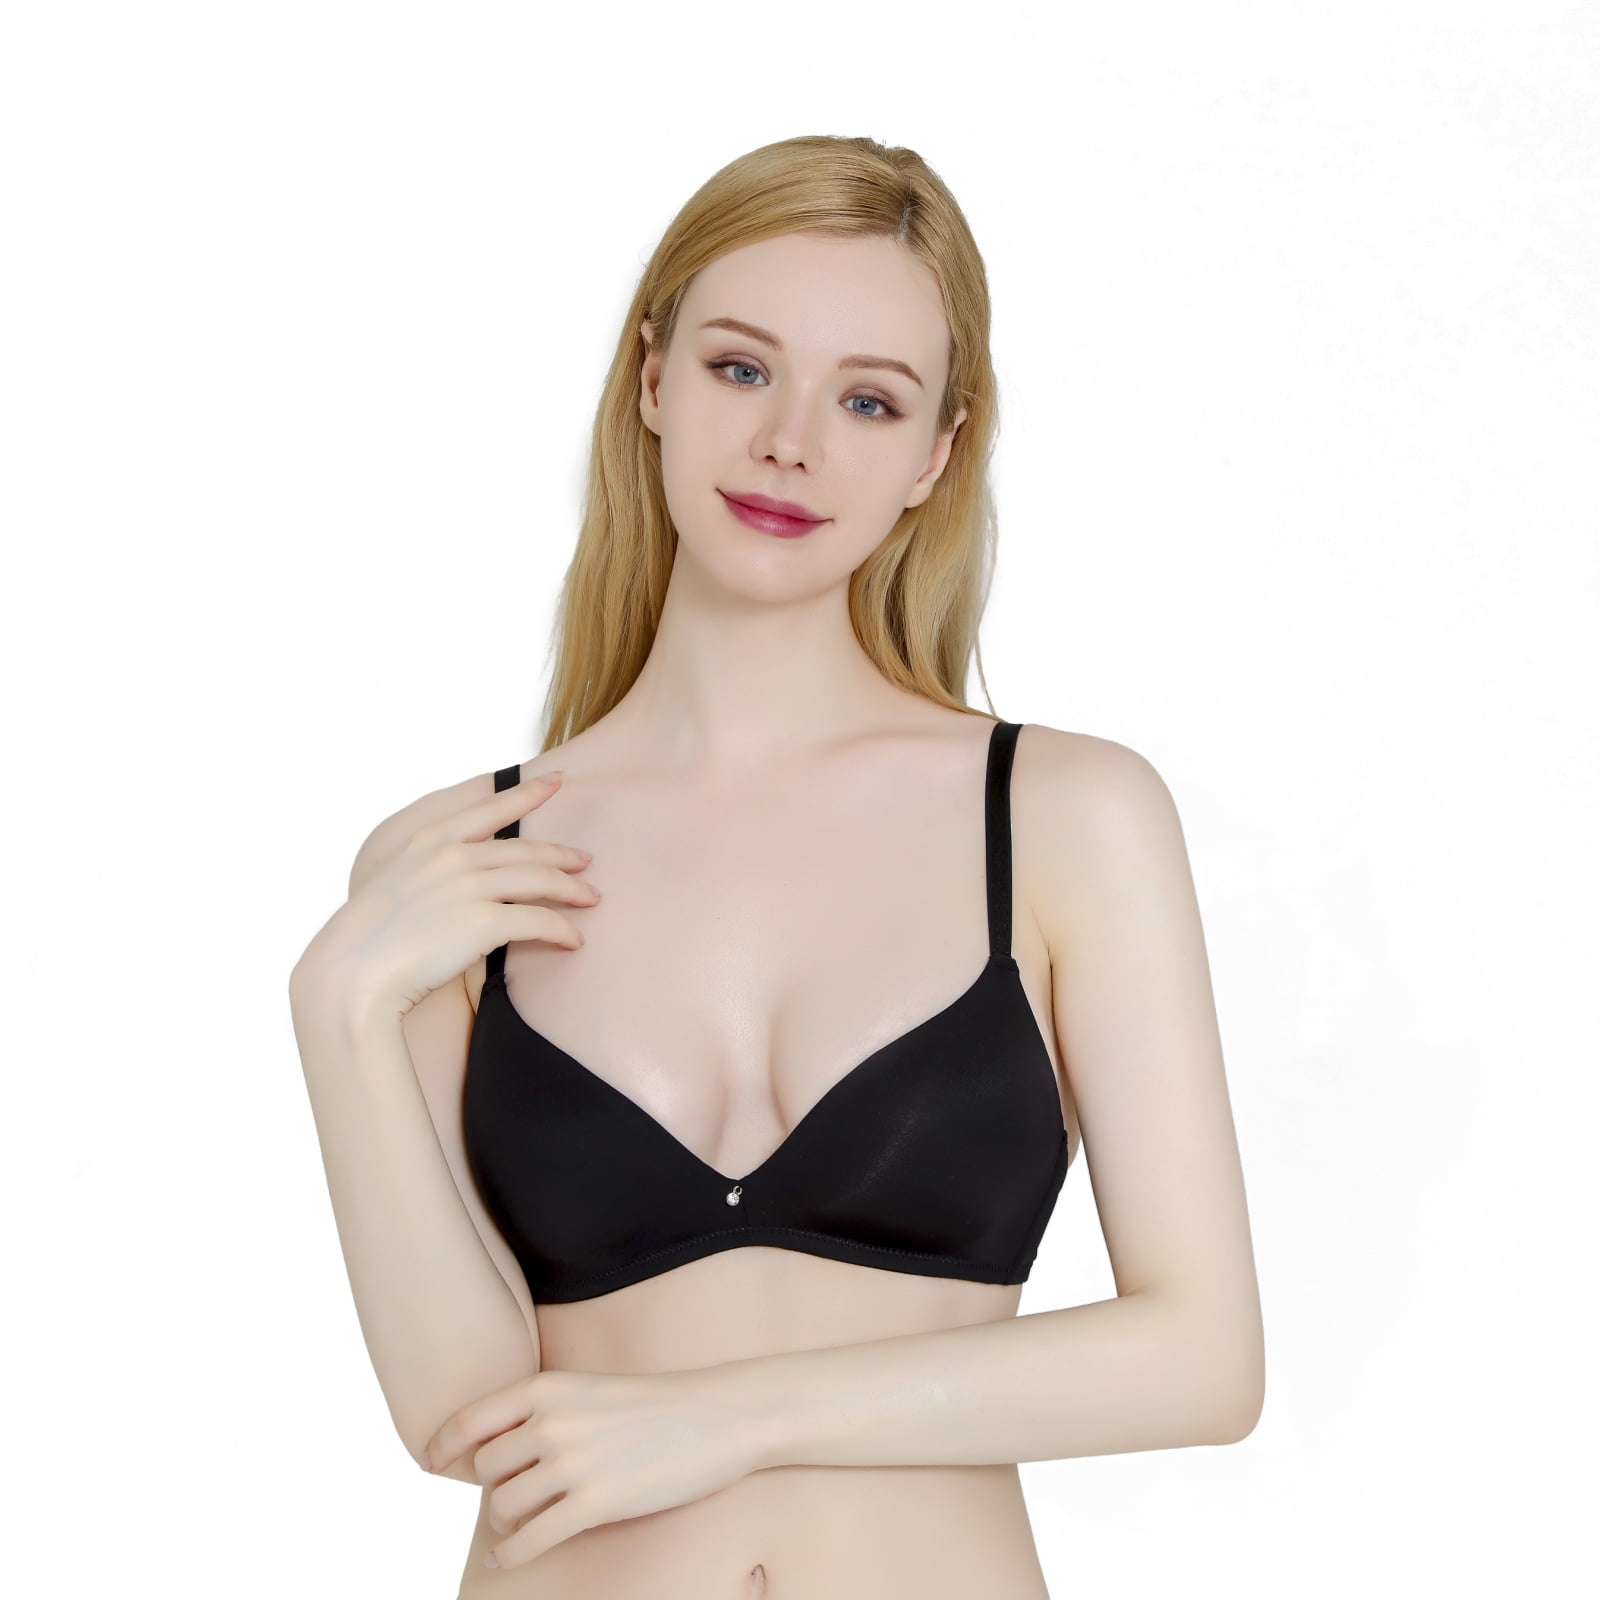 Women Bras 3 pack of No Wire Free T-Shirt Bra B cup C cup D cup Size 34C  (F2001) 